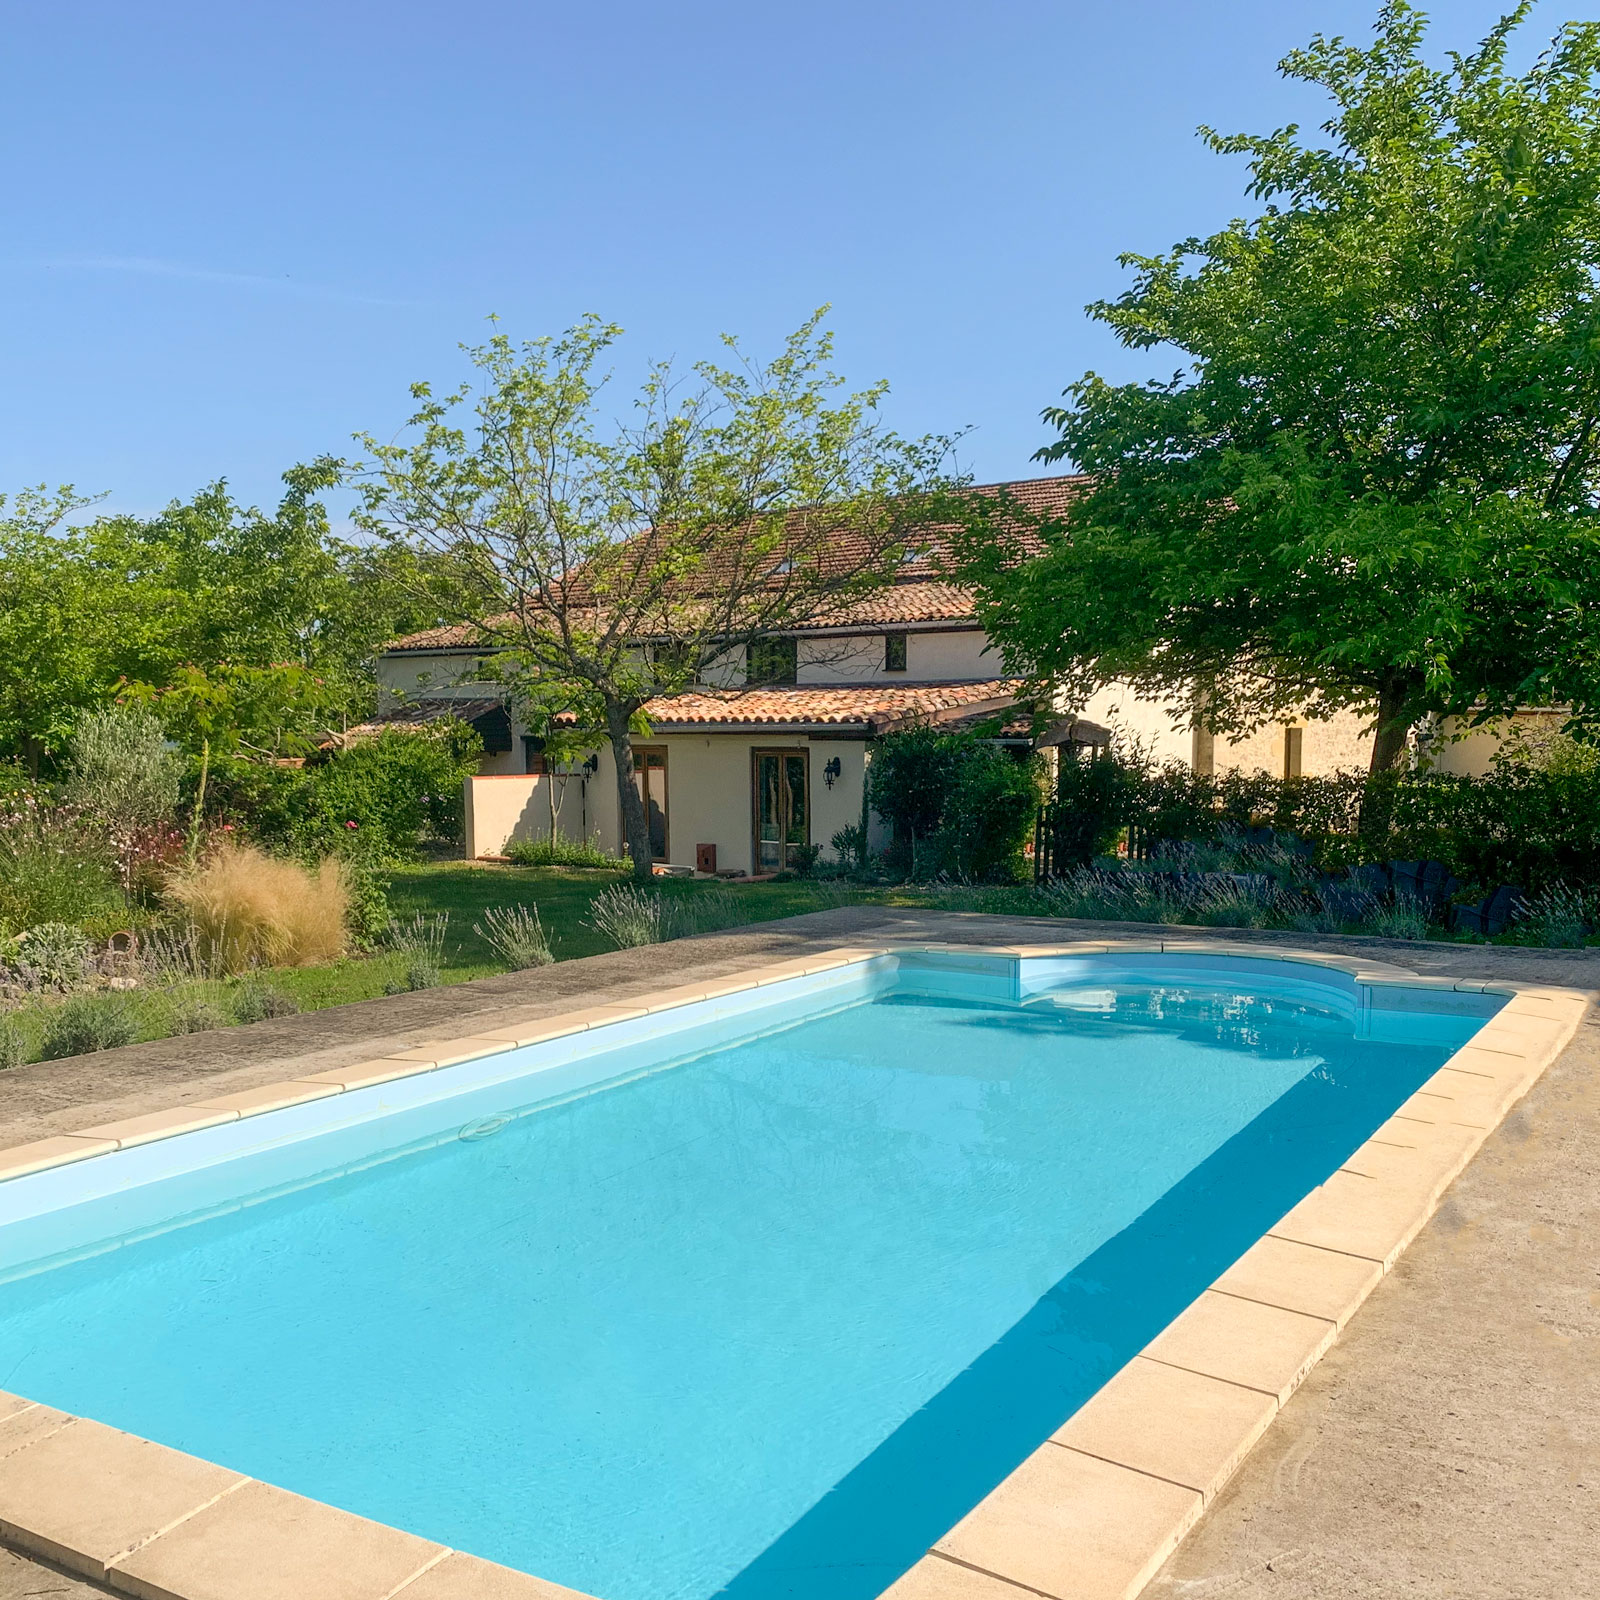 Les Oliviers holiday gites near Duras sw france with a private pool